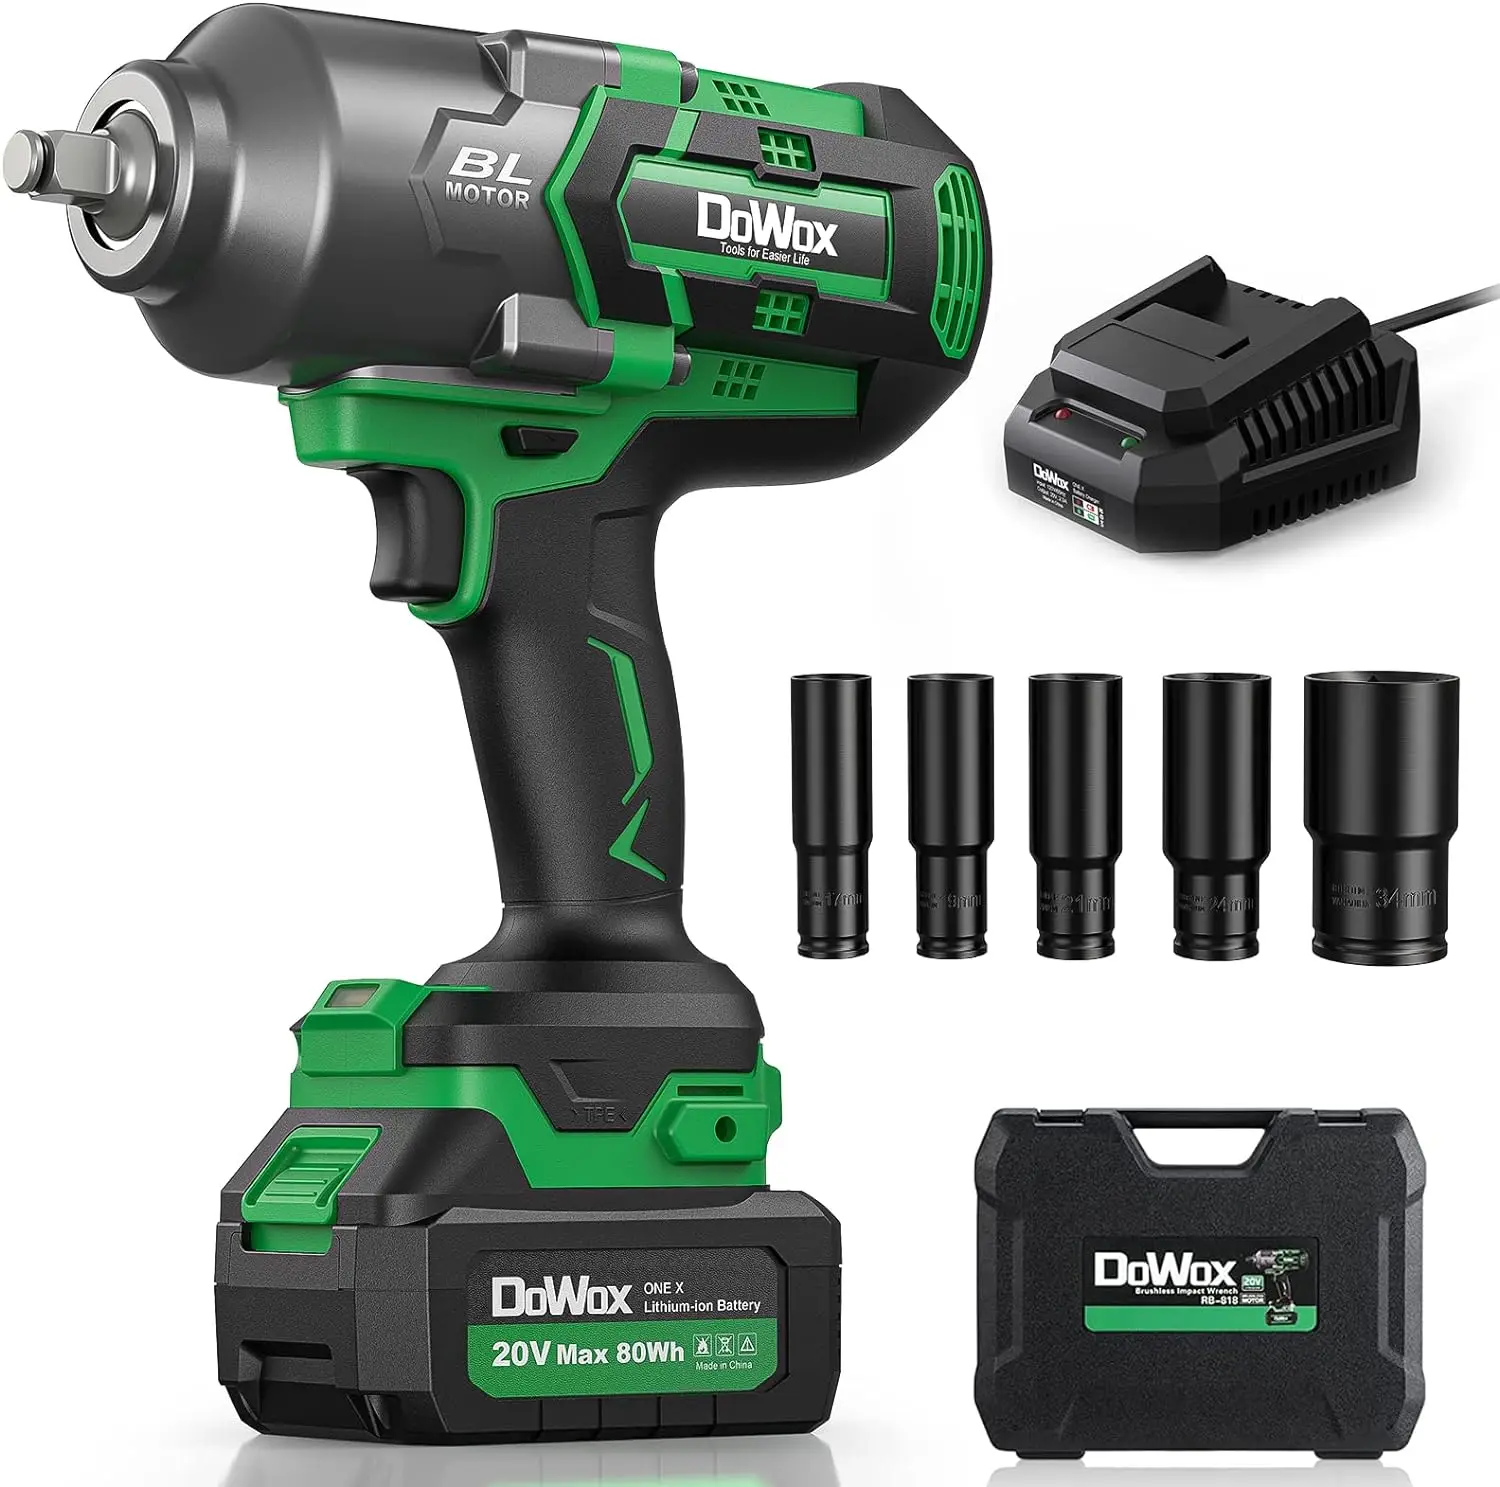 

Cordless Impact Wrench 1/2 Inch, High Torque 1200 Ft-lbs Brushless Impact Gun, 20V Power 4.0 Ah Battery, Fast Charger,